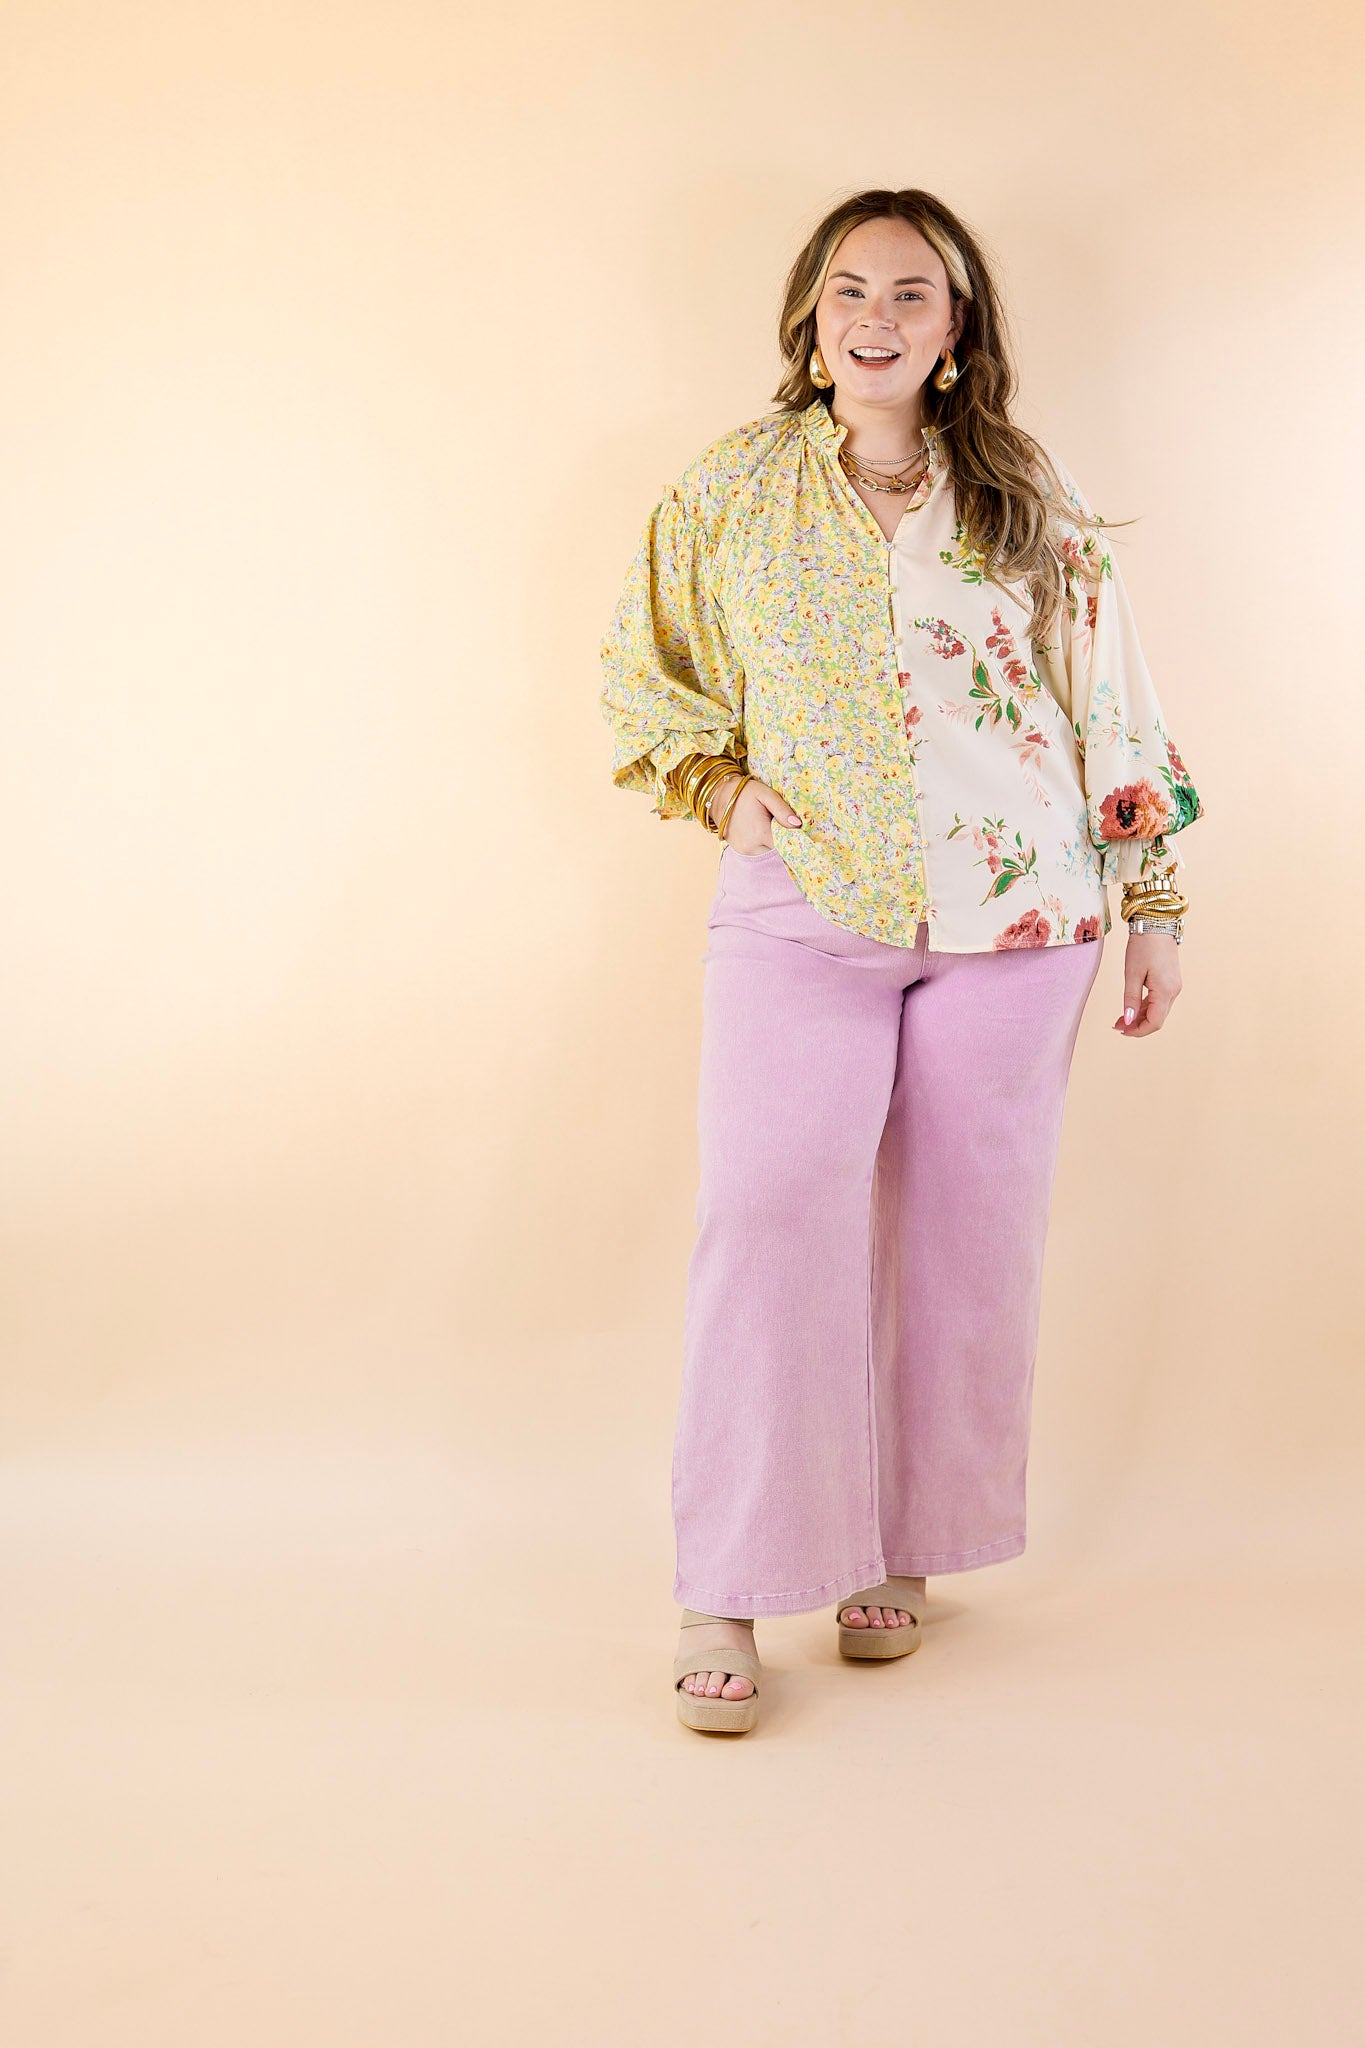 Tulip Time Floral Mix Print Button Up Blouse in Yellow - Giddy Up Glamour Boutique